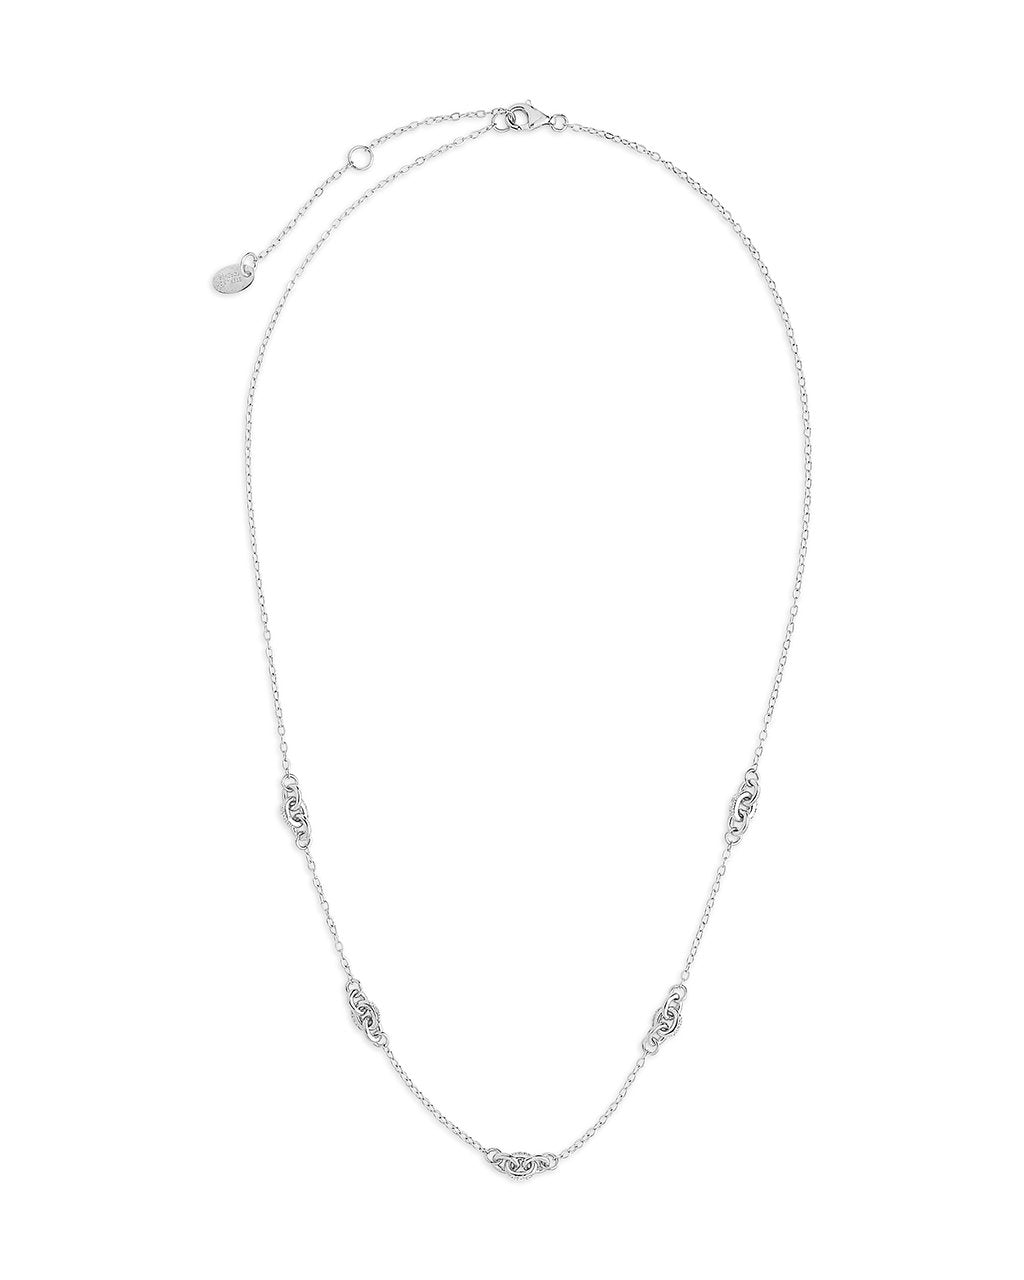 GURHAN Willow Sterling Silver Station Long Necklace, 12mm Flakes, with